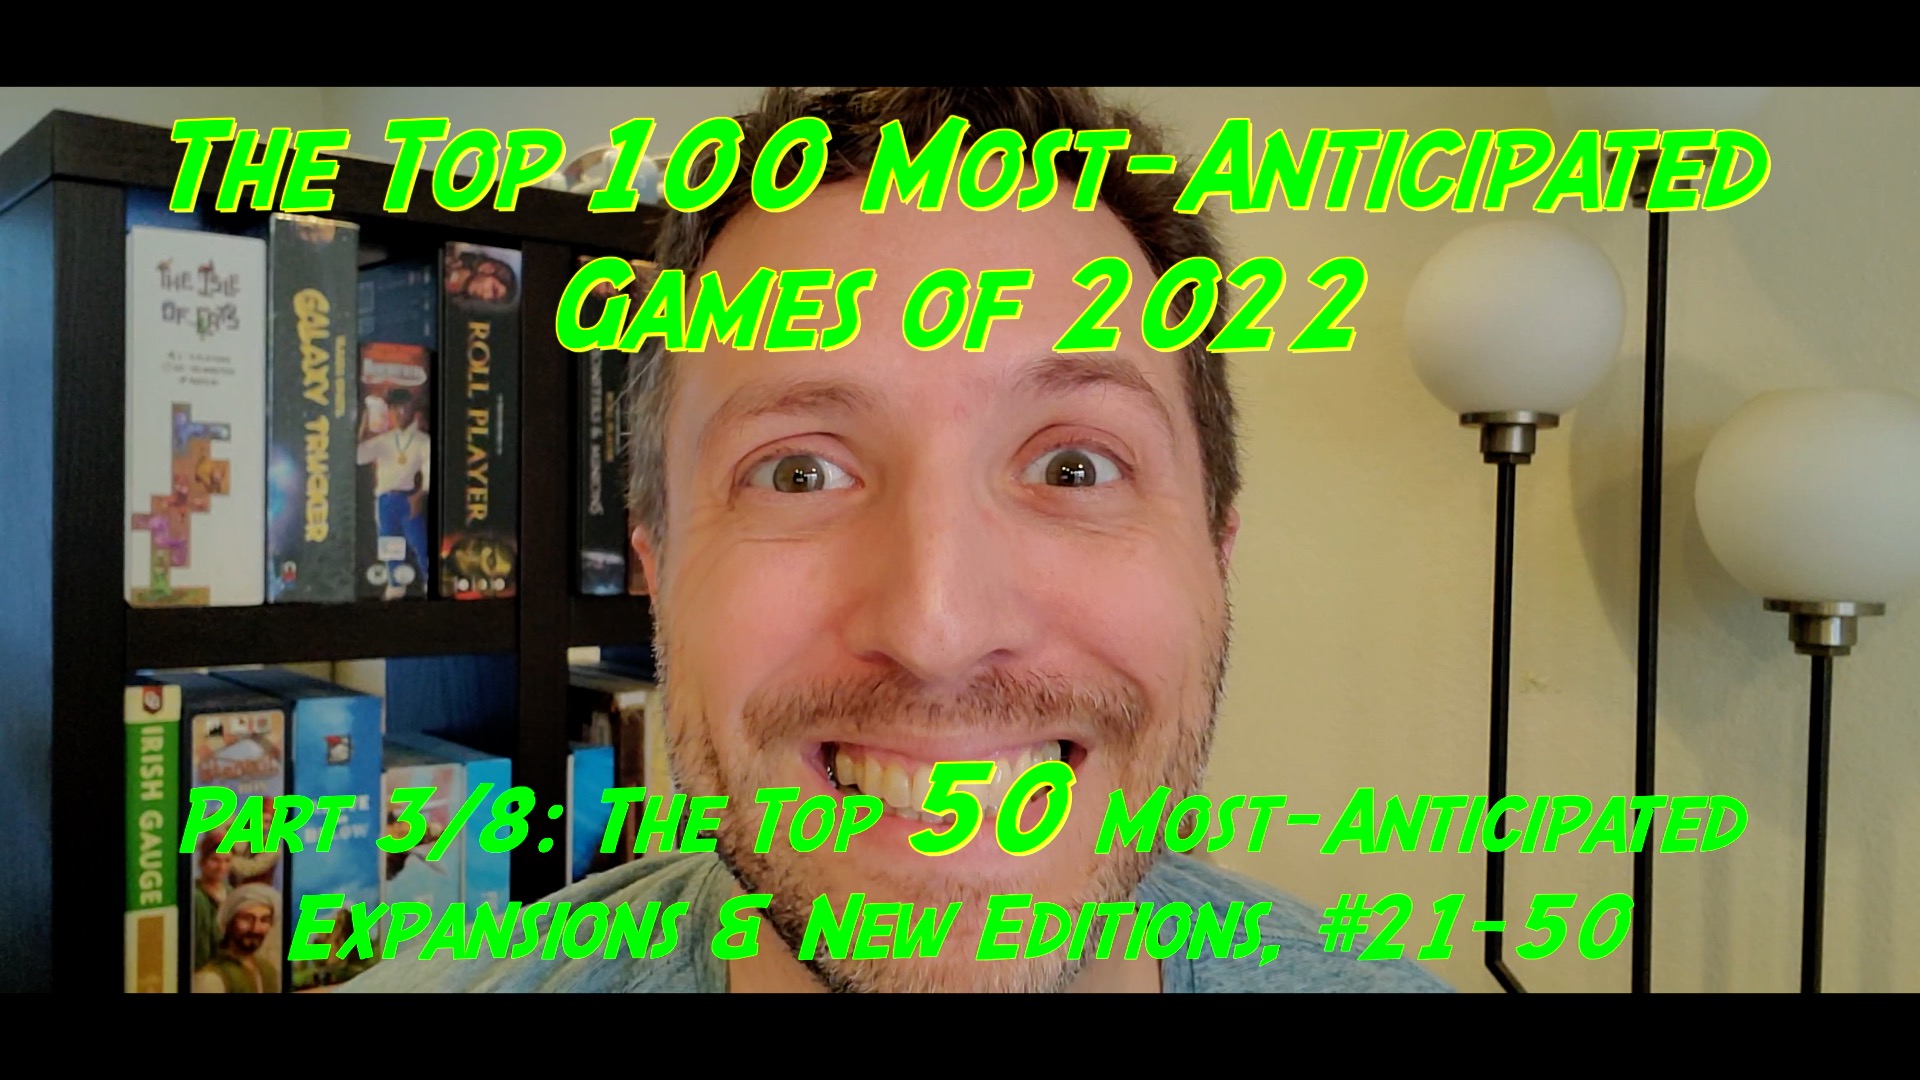 The Top 100 Most-Anticipated Games of 2022, Part 3/8: The Top 50 Most-Anticipated Expansions & New Editions, #21-50